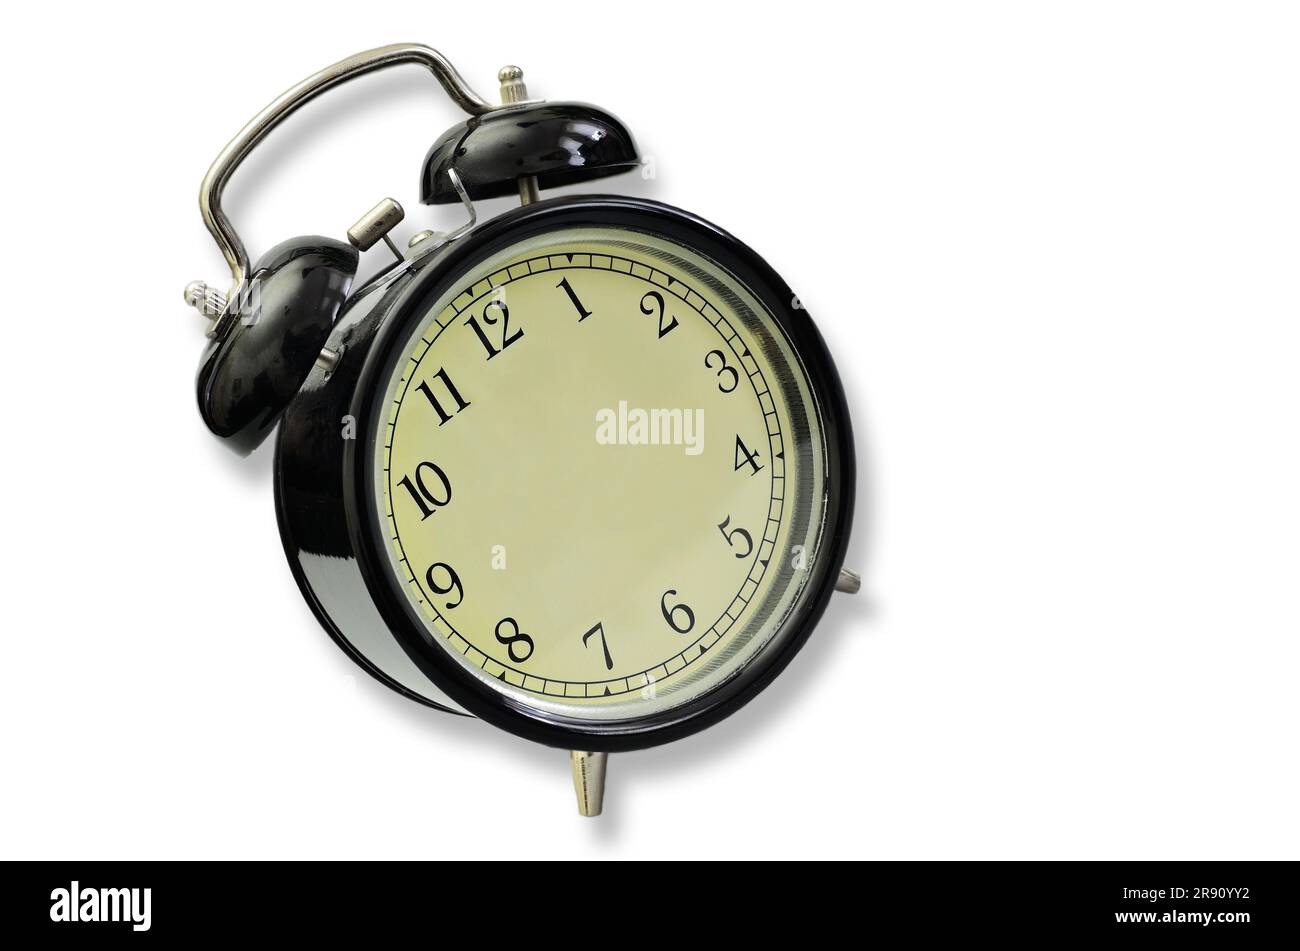 Alarm clock with no hands, close up, isolated on white background Stock Photo